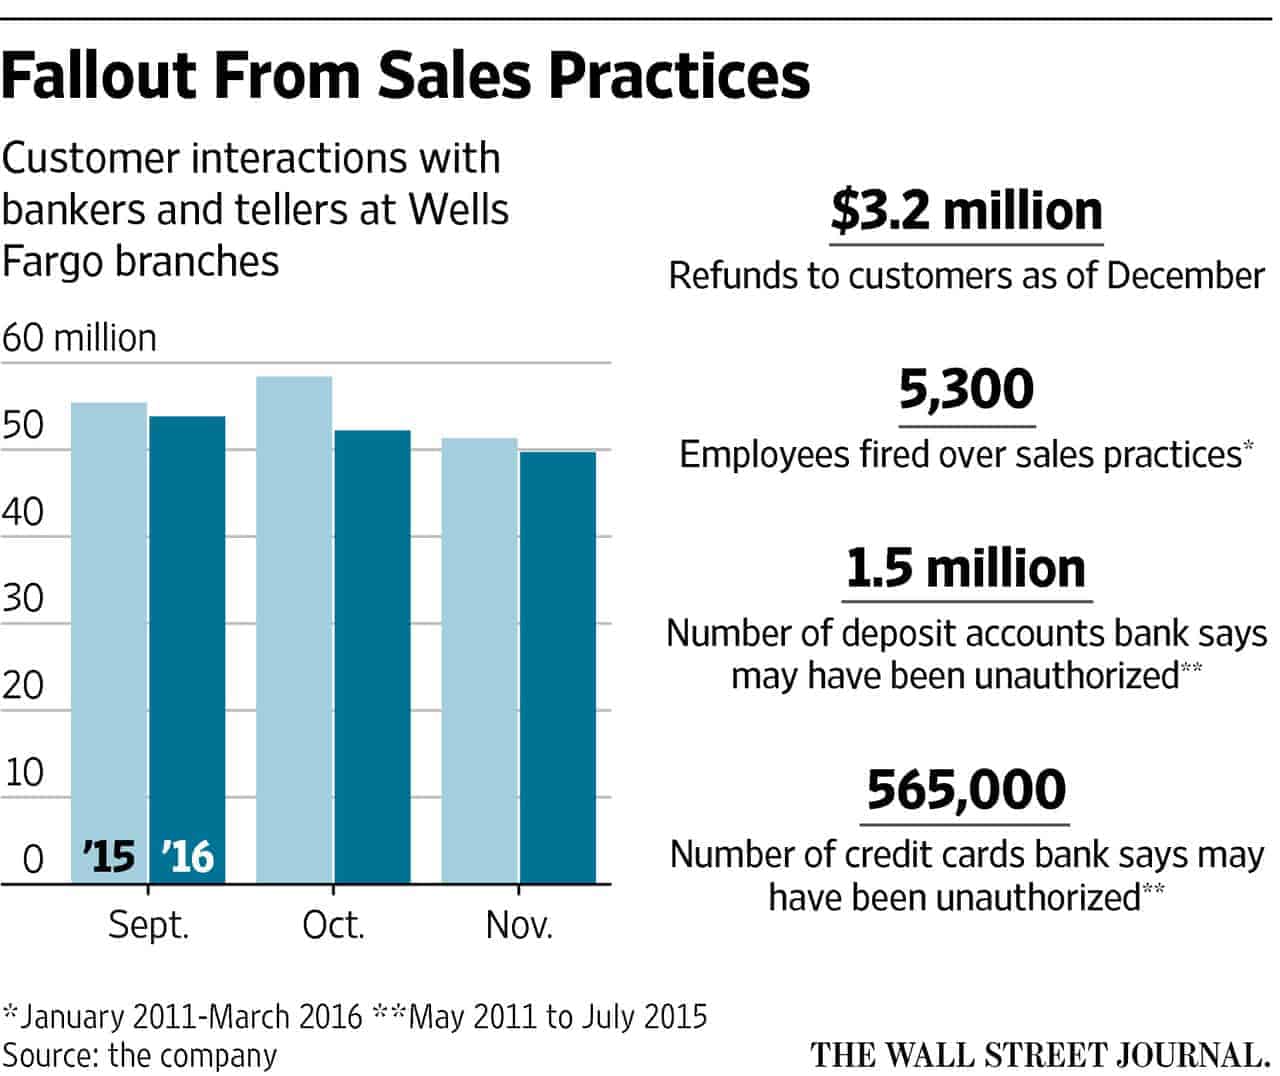 WSJ knows the toxic culture at Wells Fargo did this